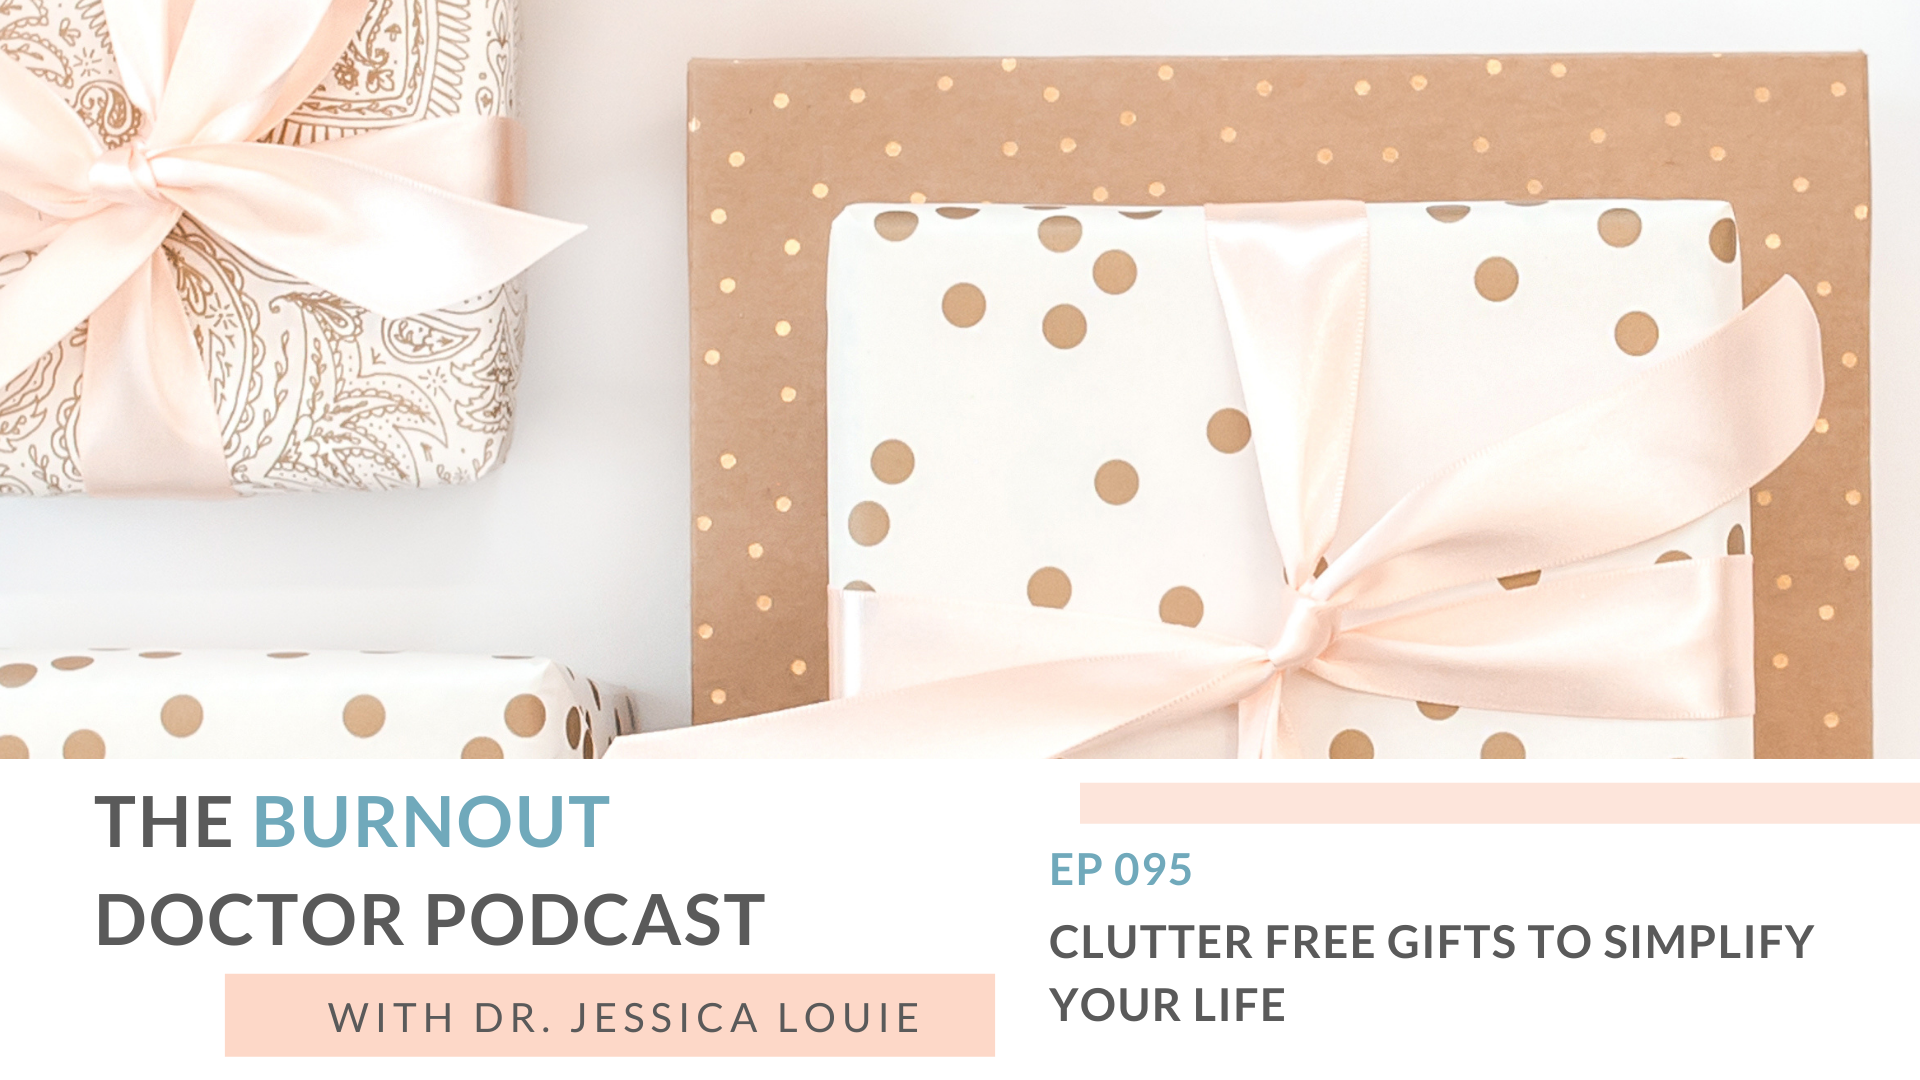 Clutter free gifts to simplify holiday season. no stuff holiday gift giving. Simplifying and decluttering the holiday season and Christmas gifts. Experience gift ideas. Consumable gift ideas. KonMari Method. Dr. Jessica Louie on The Burnout Doctor Podcast.